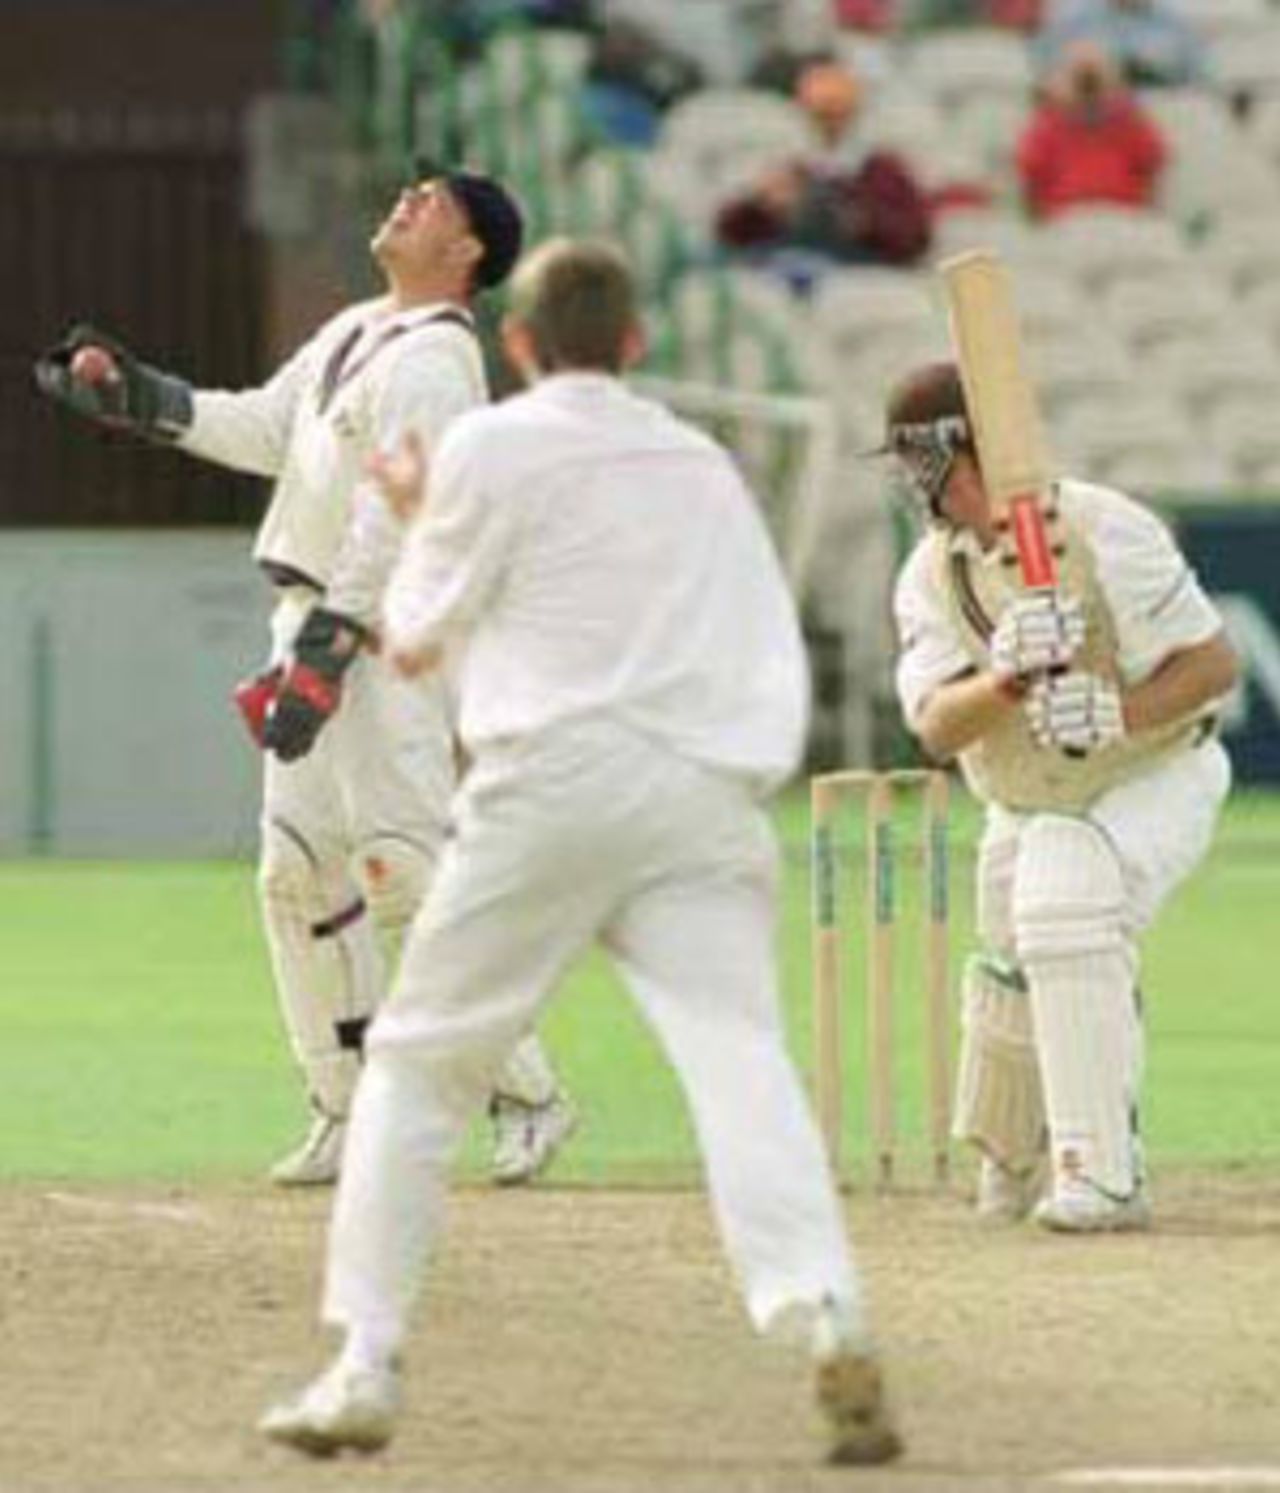 Warren Hegg catches out Ian Salisbury, PPP healthcare County Championship Division One, 2000, Lancashire v Surrey, Old Trafford, Manchester, 13-16 September 2000(Day 2).